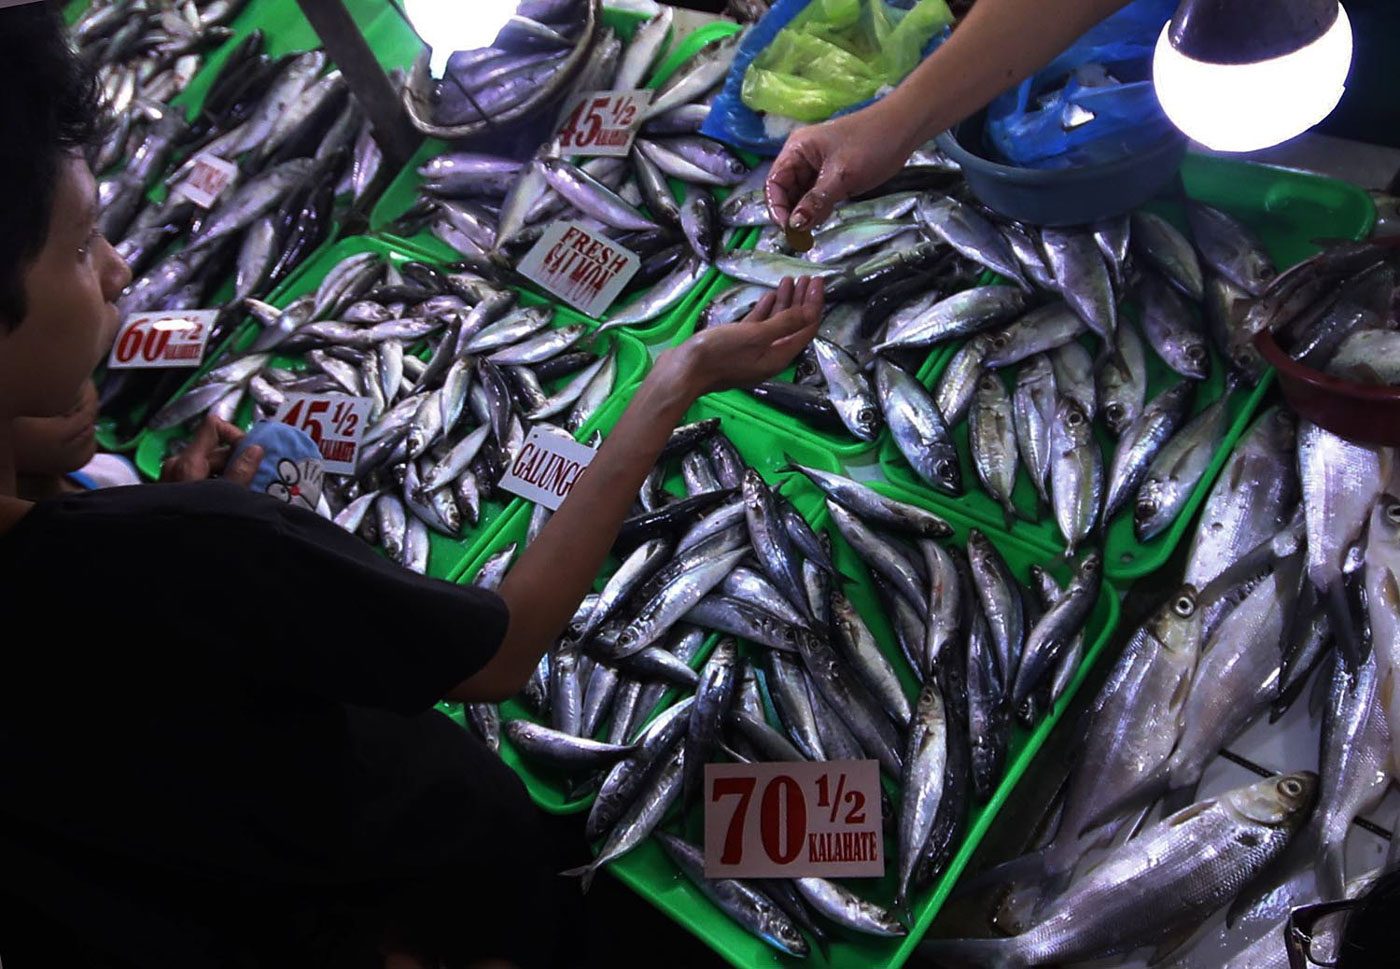 Galunggong imported from China may come from West Philippine Sea